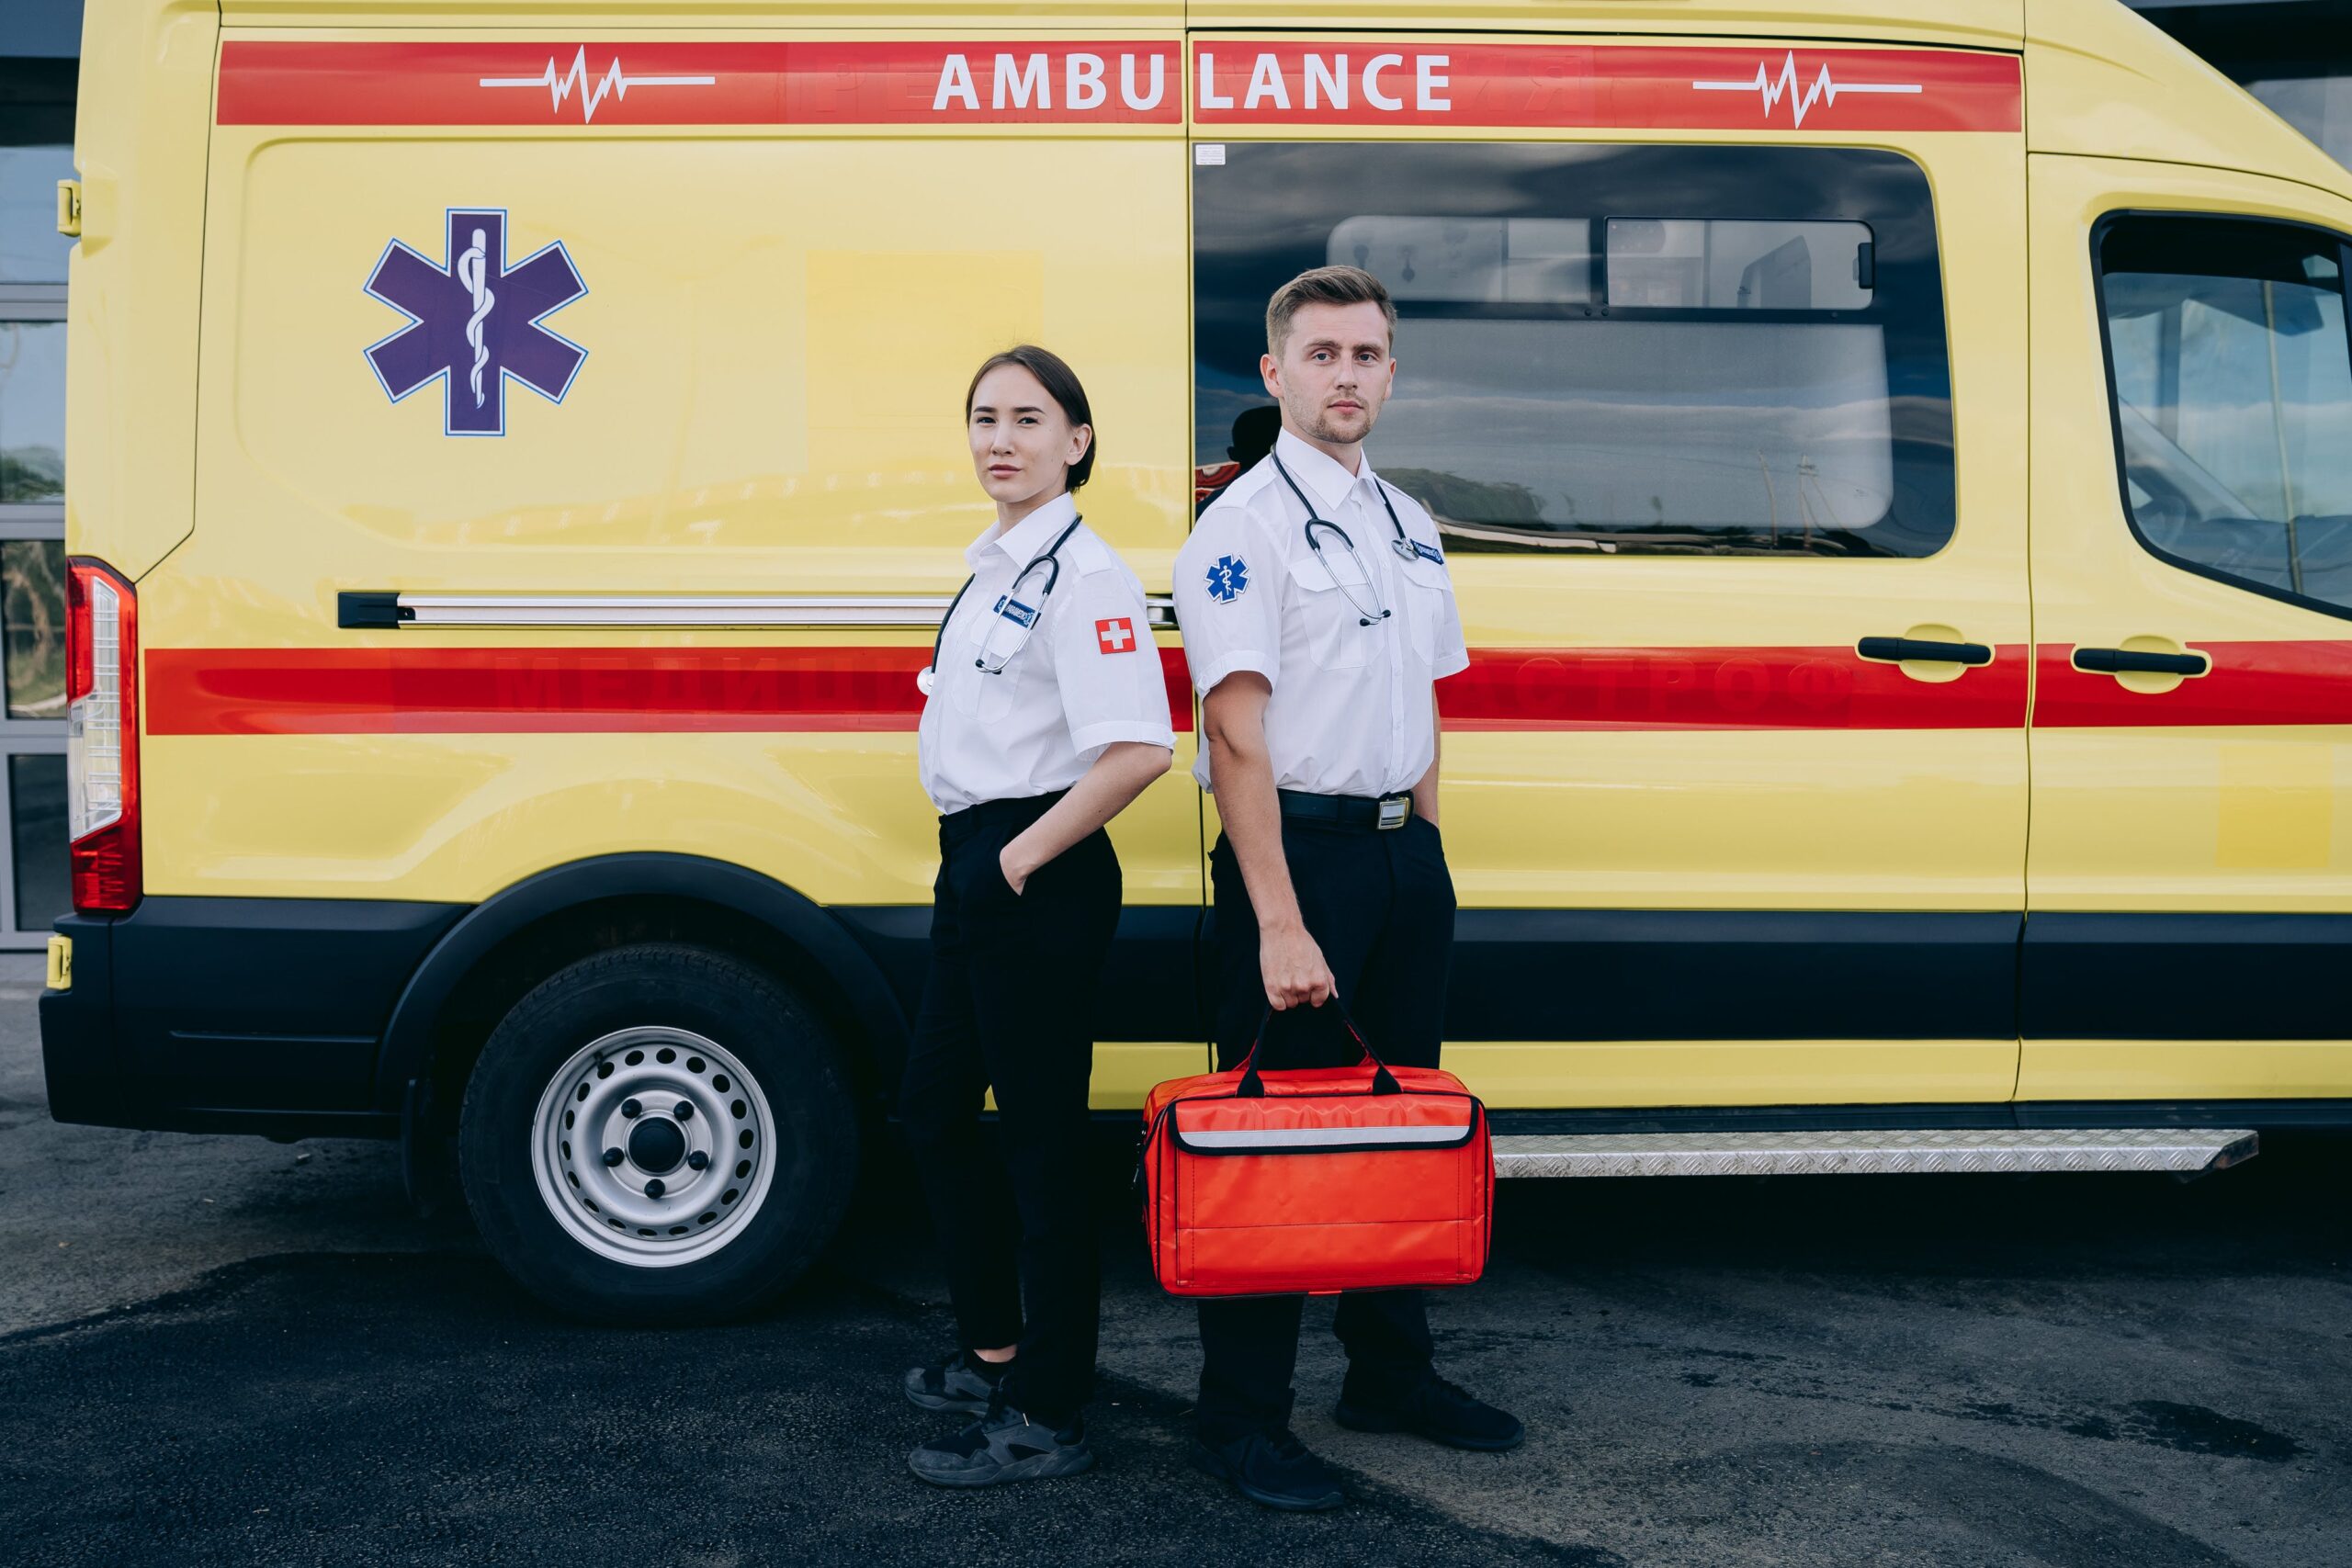 Does Insurance Cover Non-Emergency Medical Transportation?